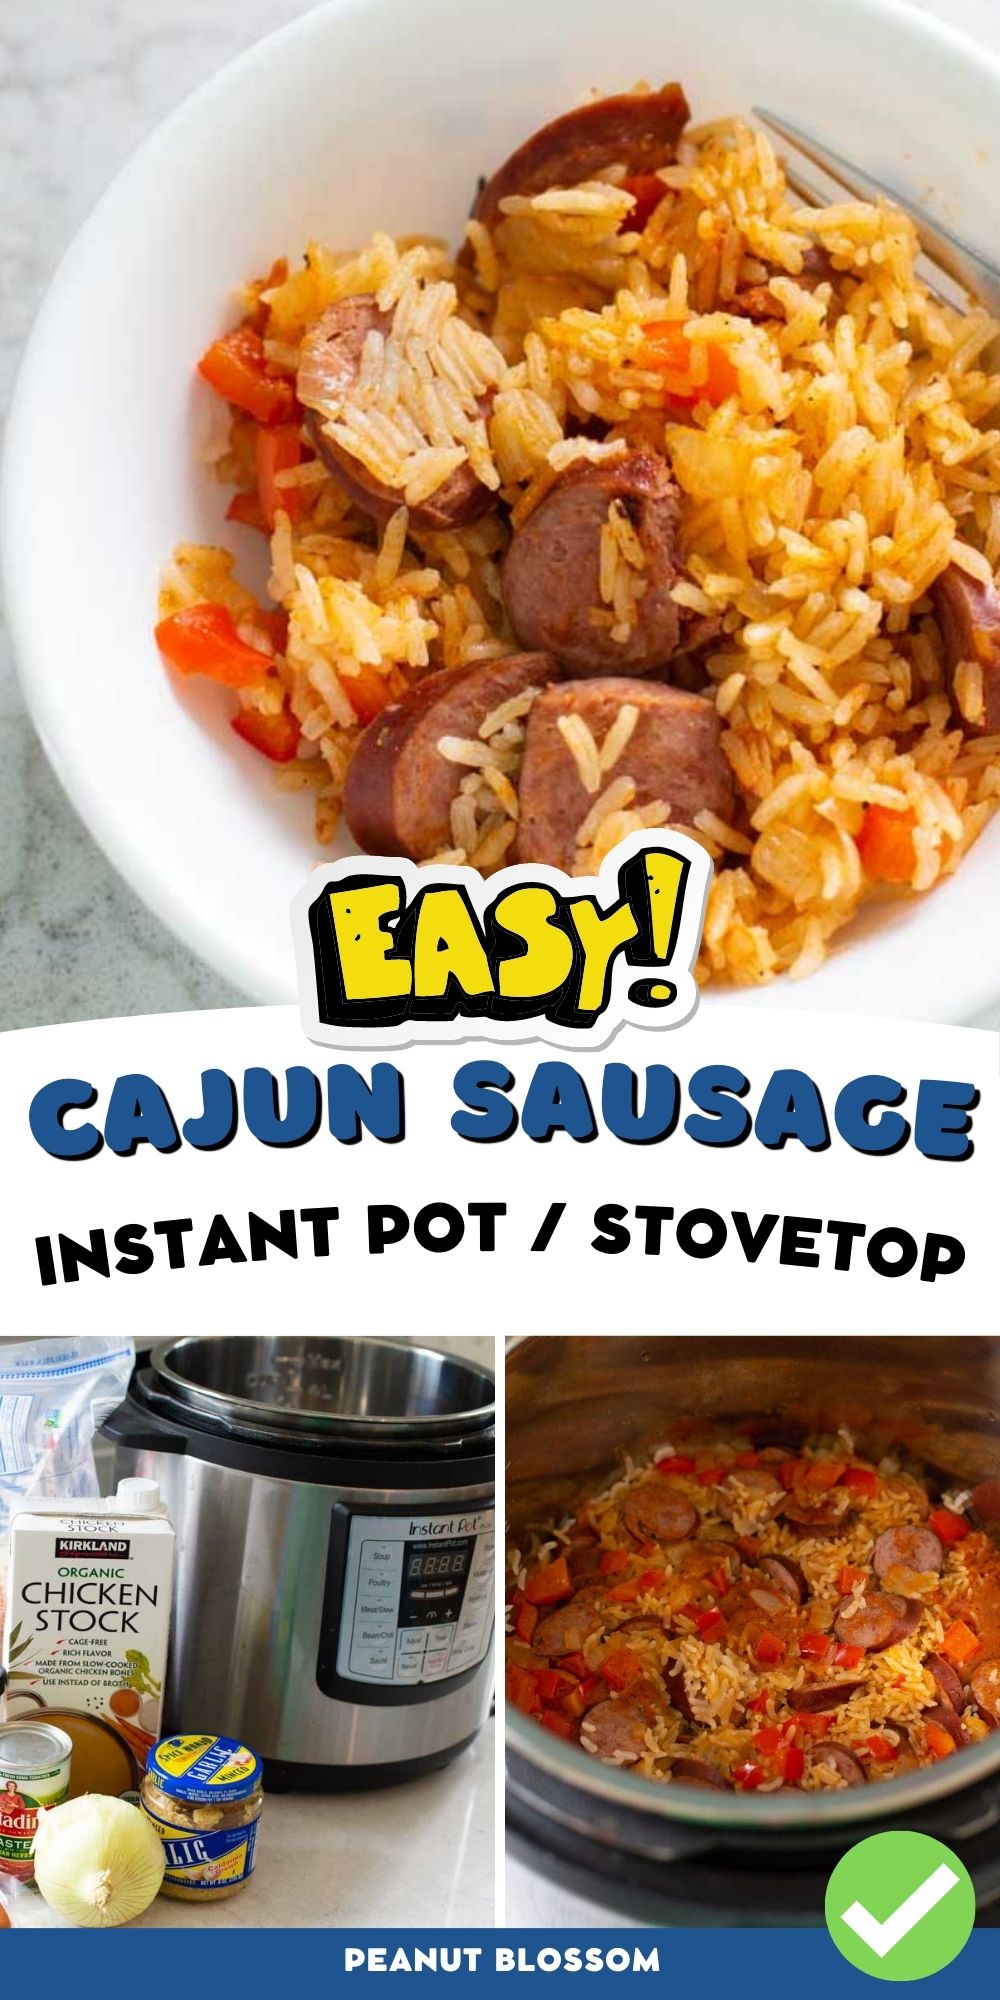 A photo collage shows the finished cajun sausage and rice next to pictures of the Instant Pot outside and the finished dish in the pot.